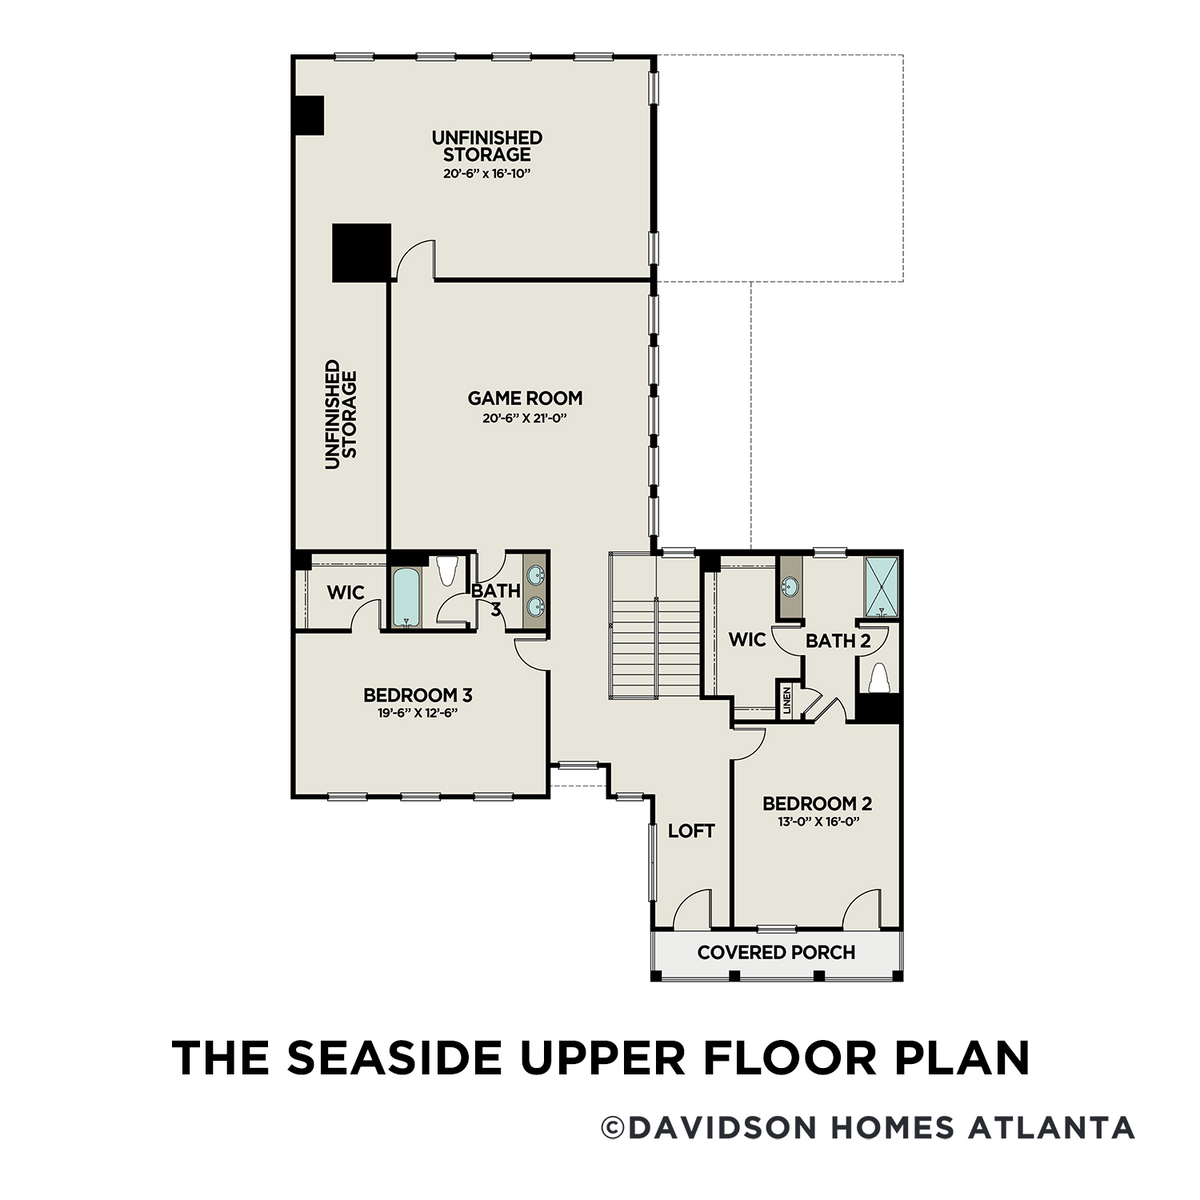 2 - The Seaside A floor plan layout for 412 Falling Water Avenue in Davidson Homes' The Village at Towne Lake community.